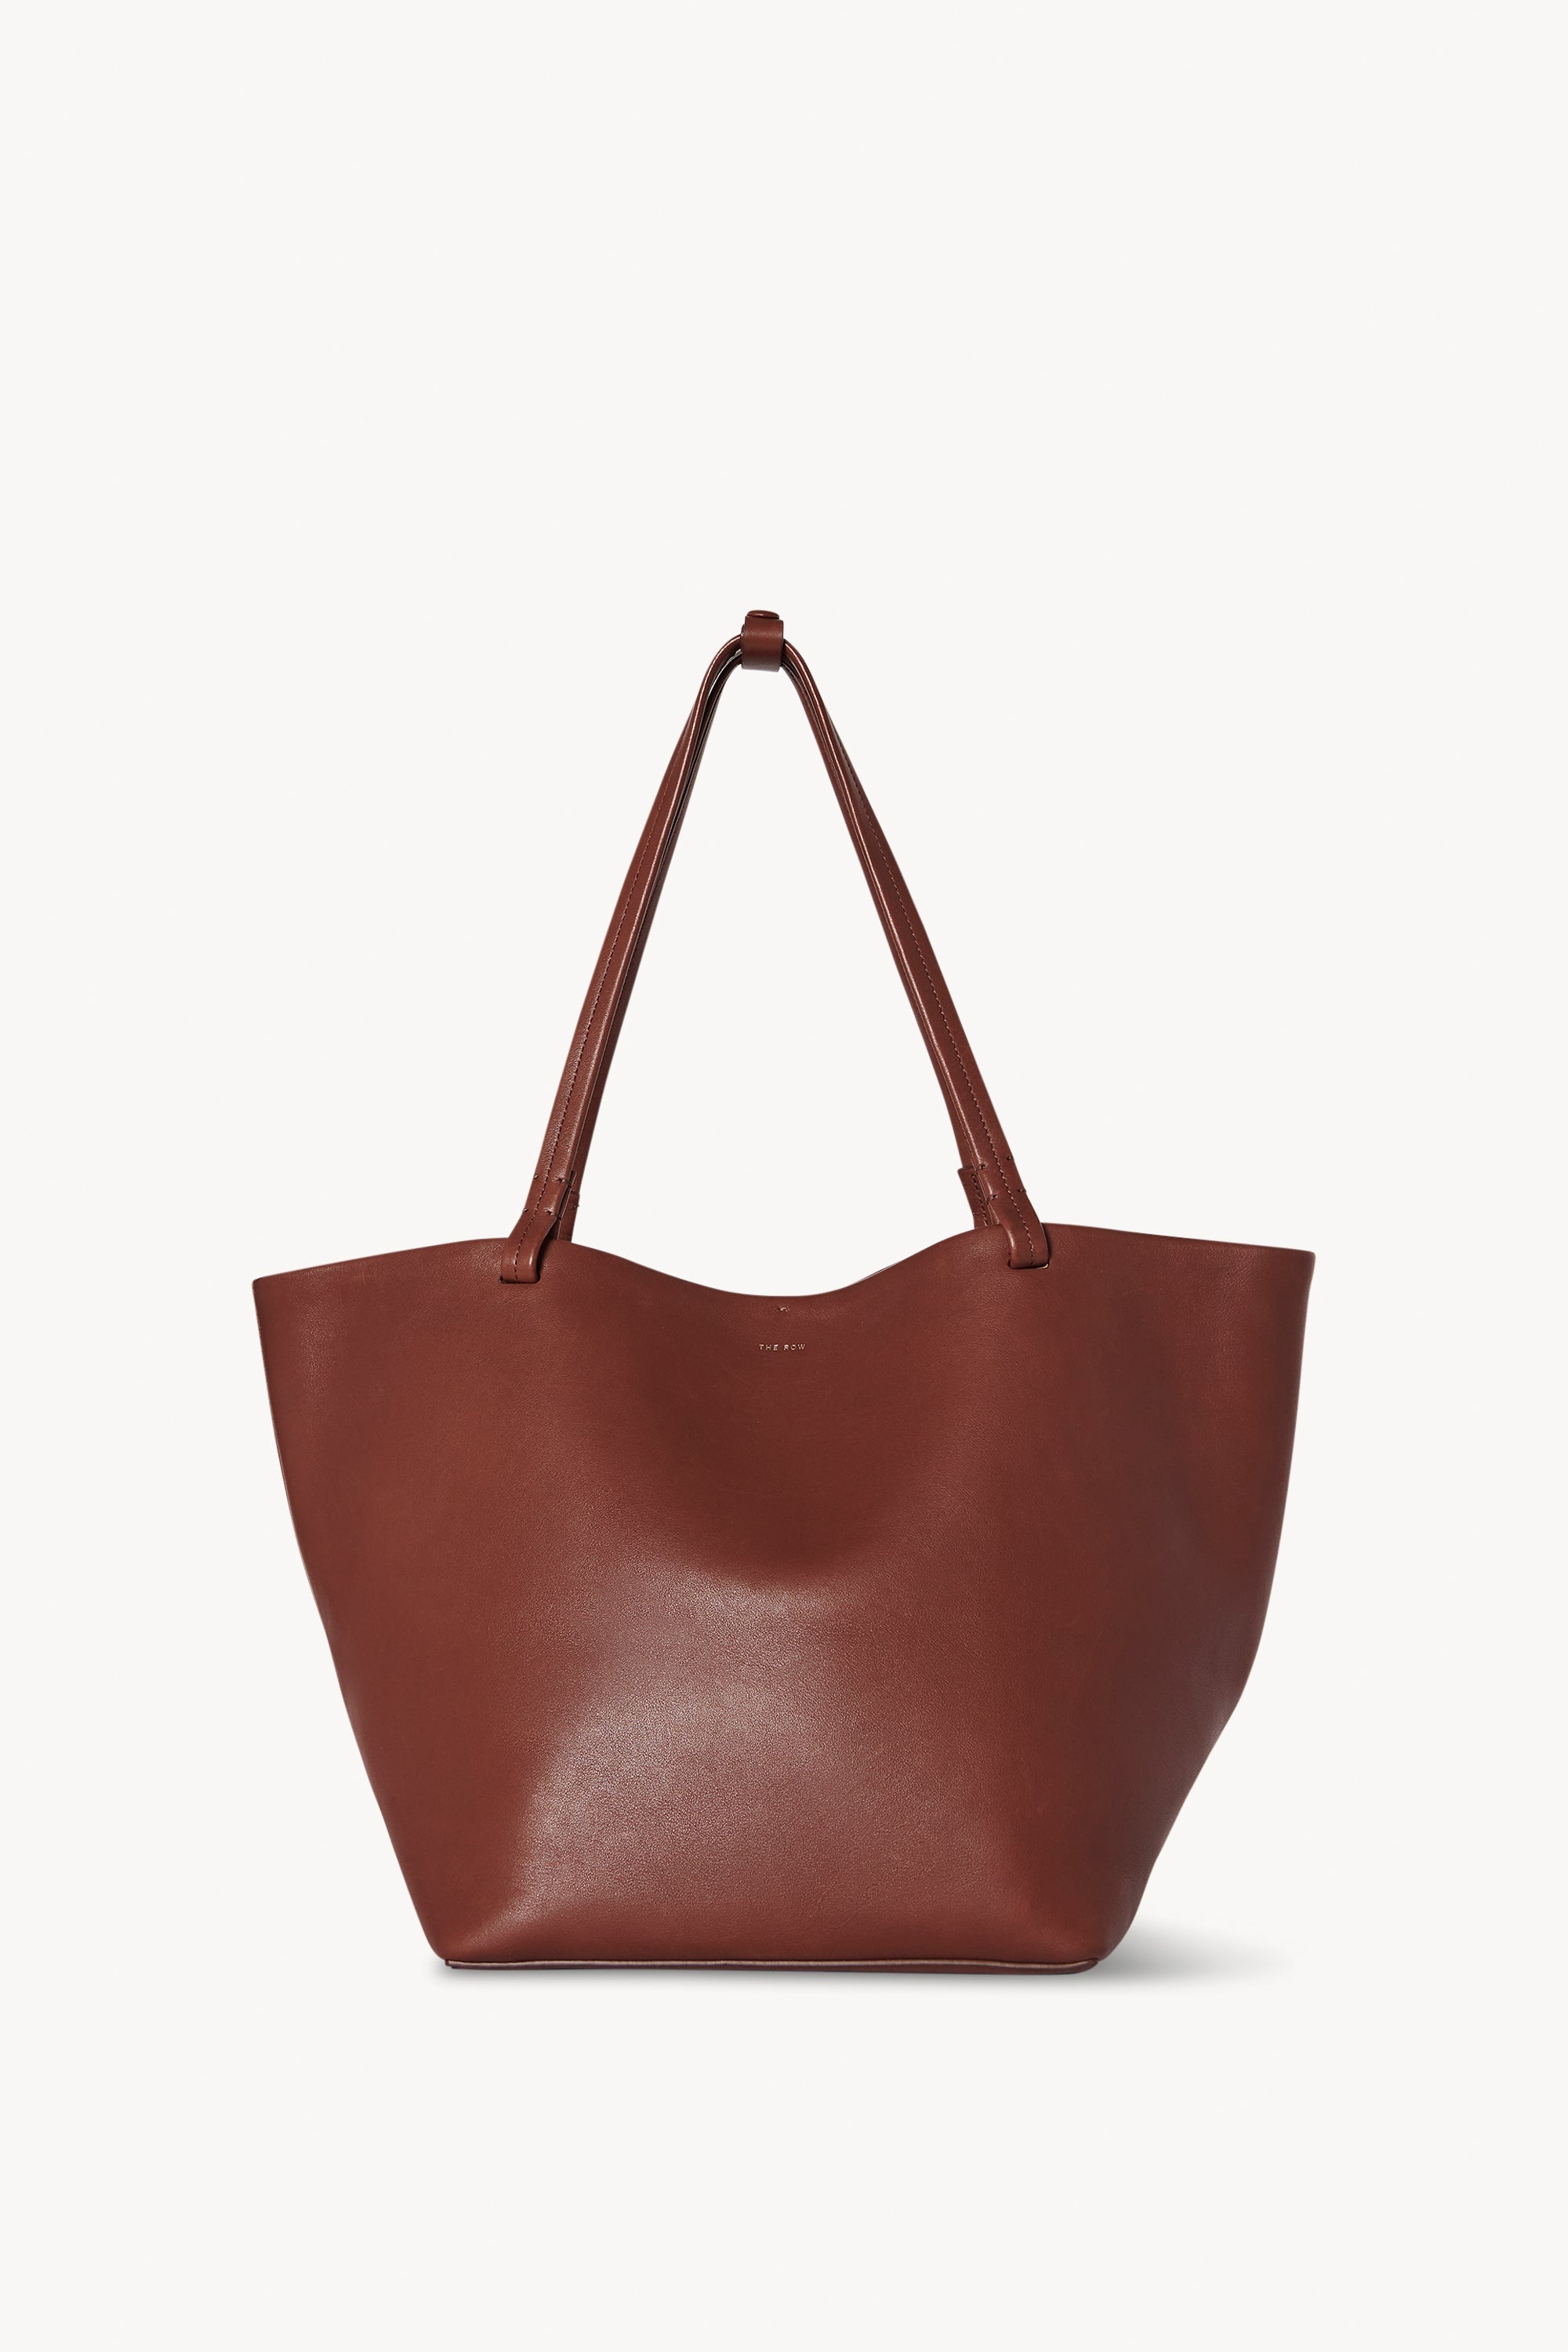 Park Tote Three Bag in Leather - 1